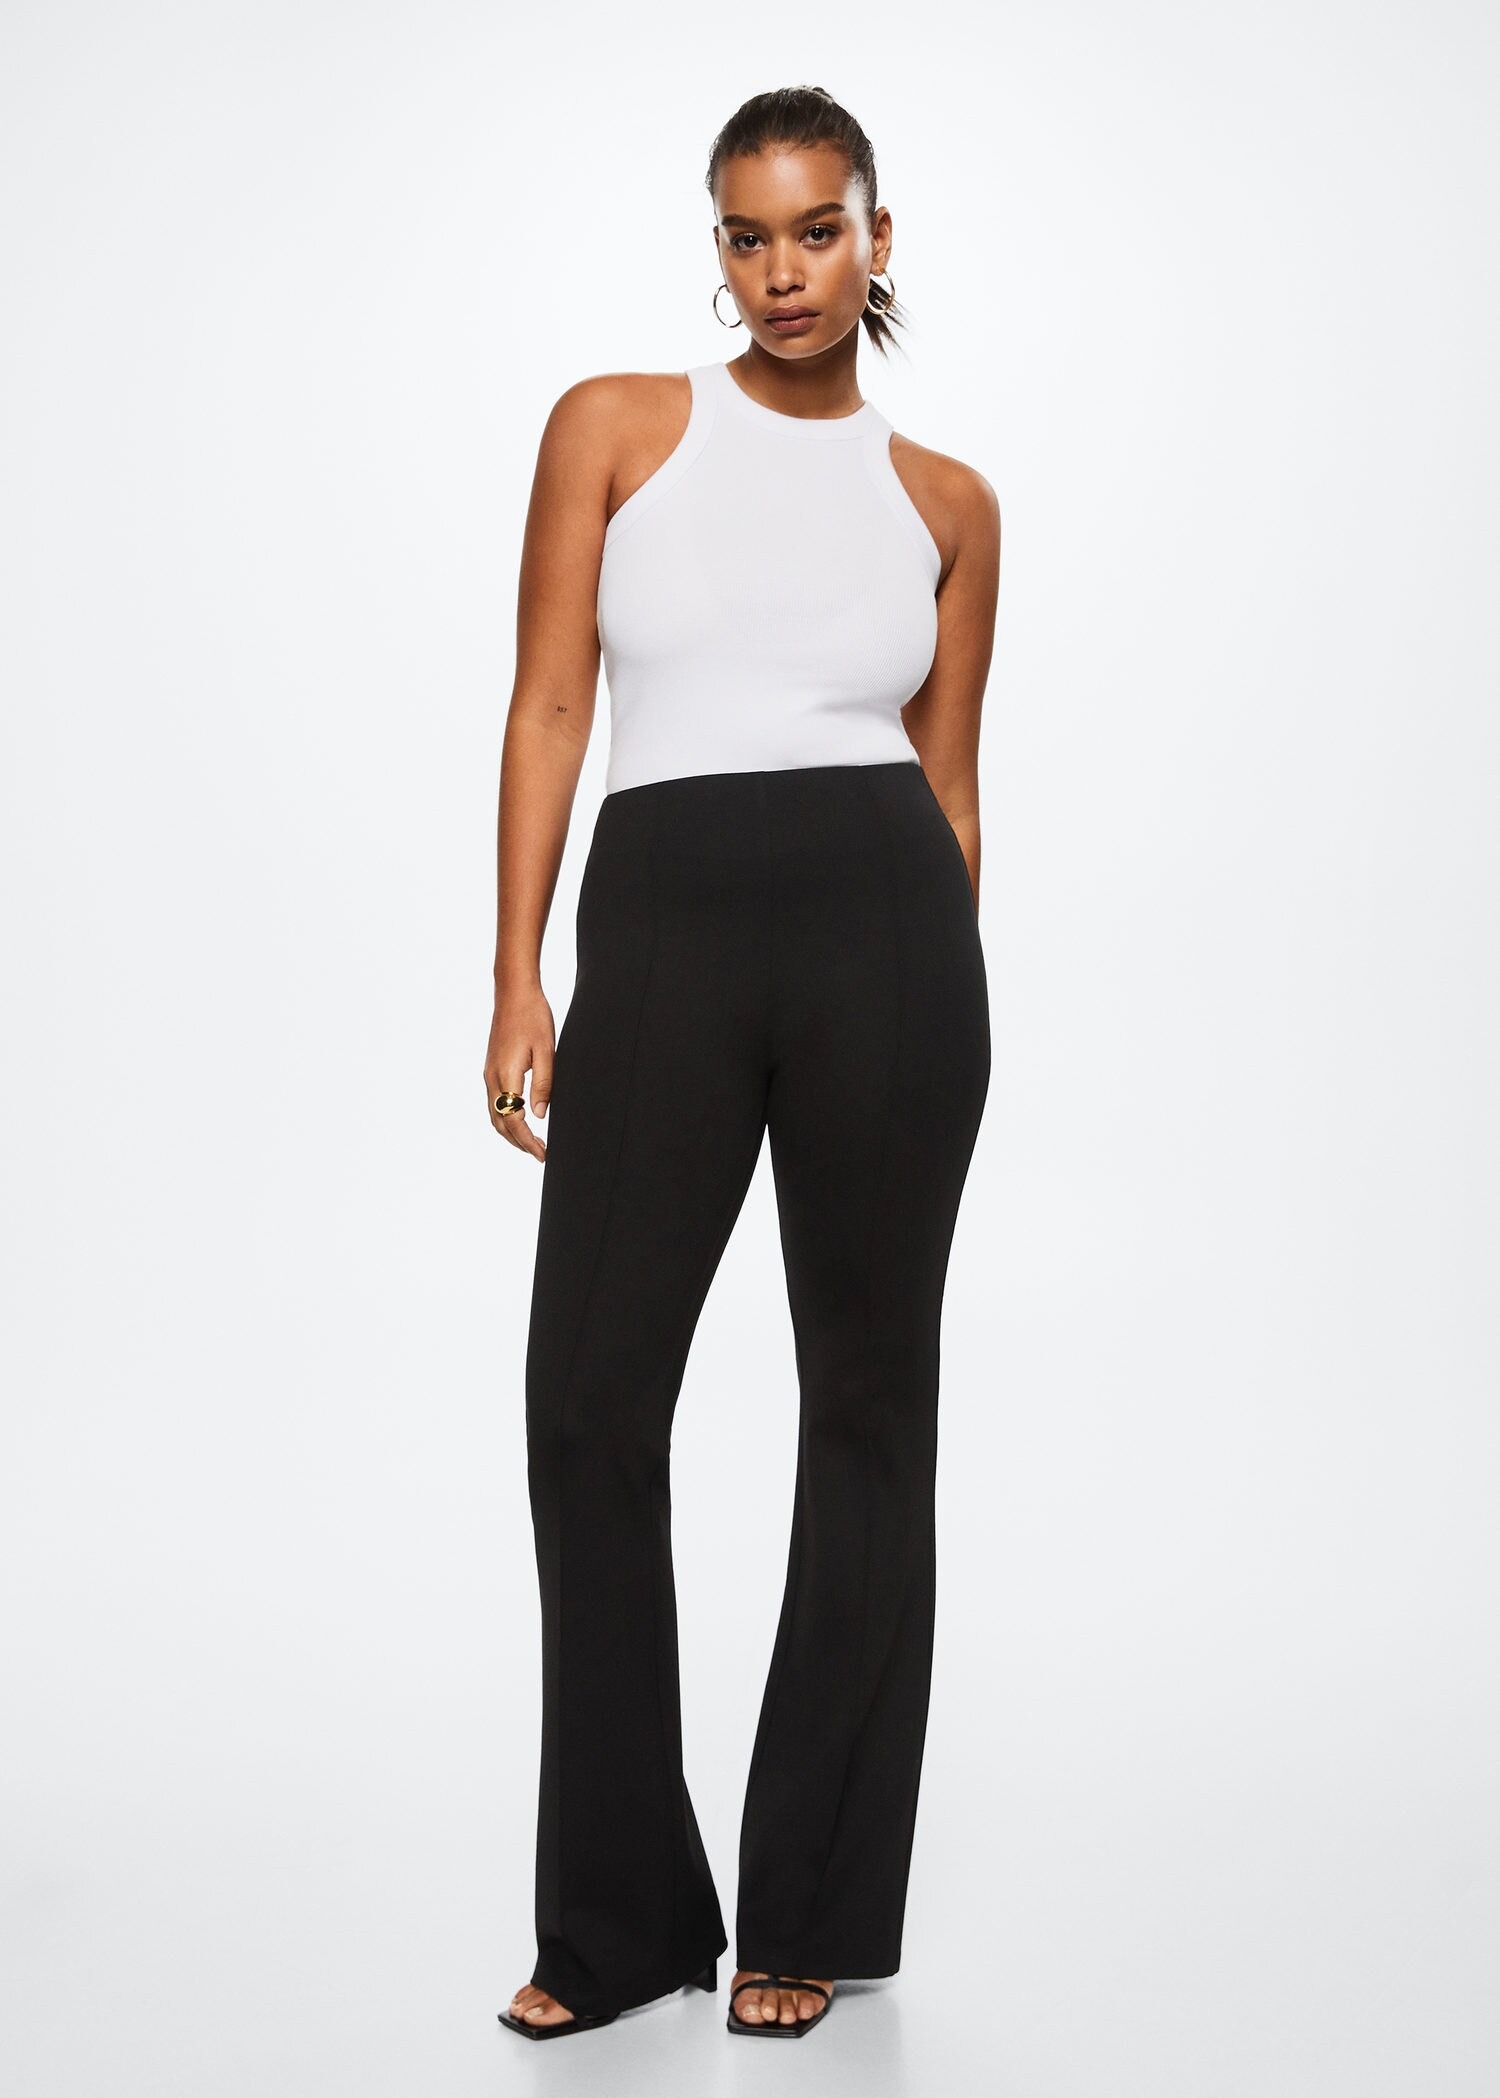 30 Pairs of Flare Pants That Will Make You Forget Skinnies | Who 